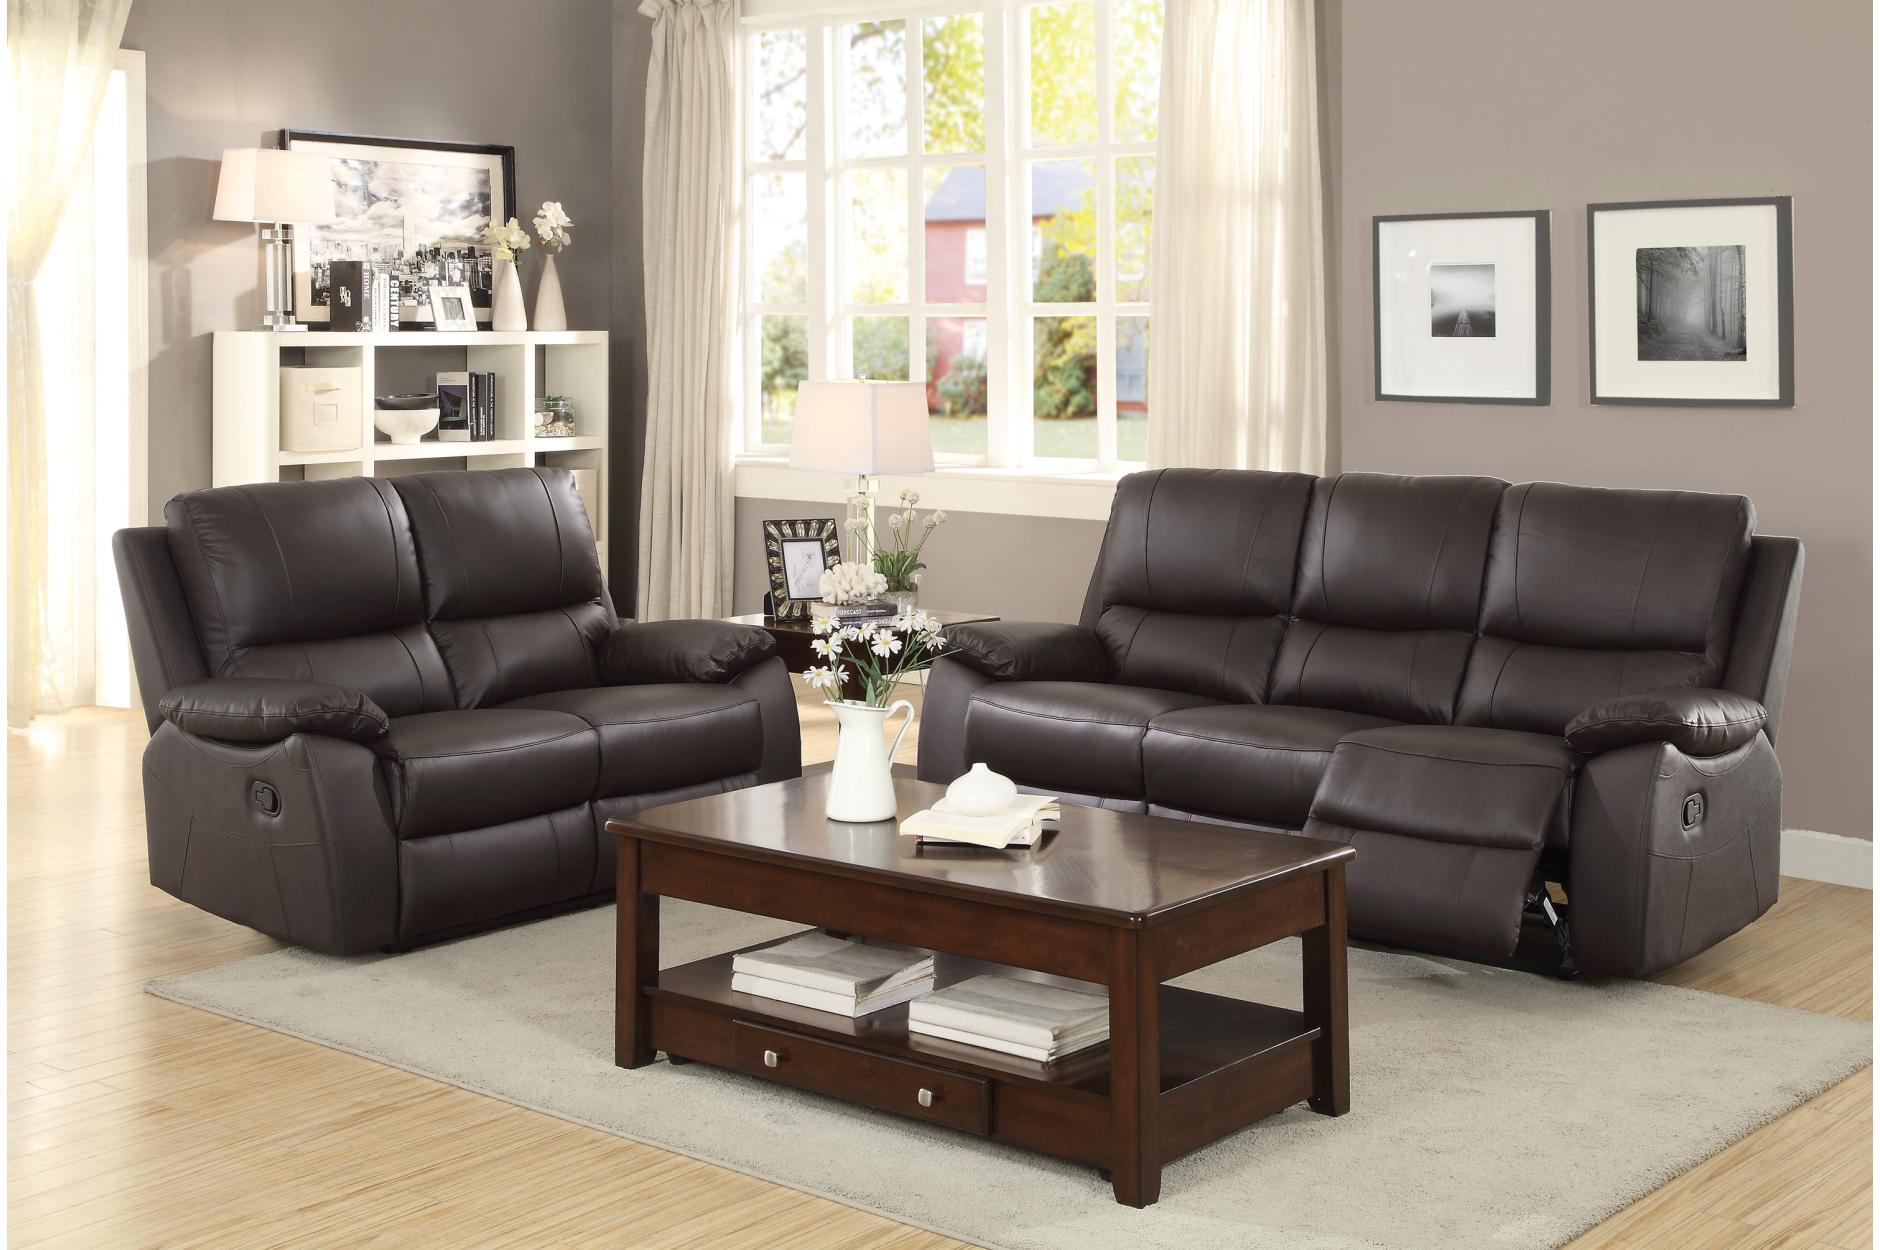 

    
Homelegance 8325BRW Greeley Brown Top Grain Leather Double Reclining Sofa Set 2Pc
